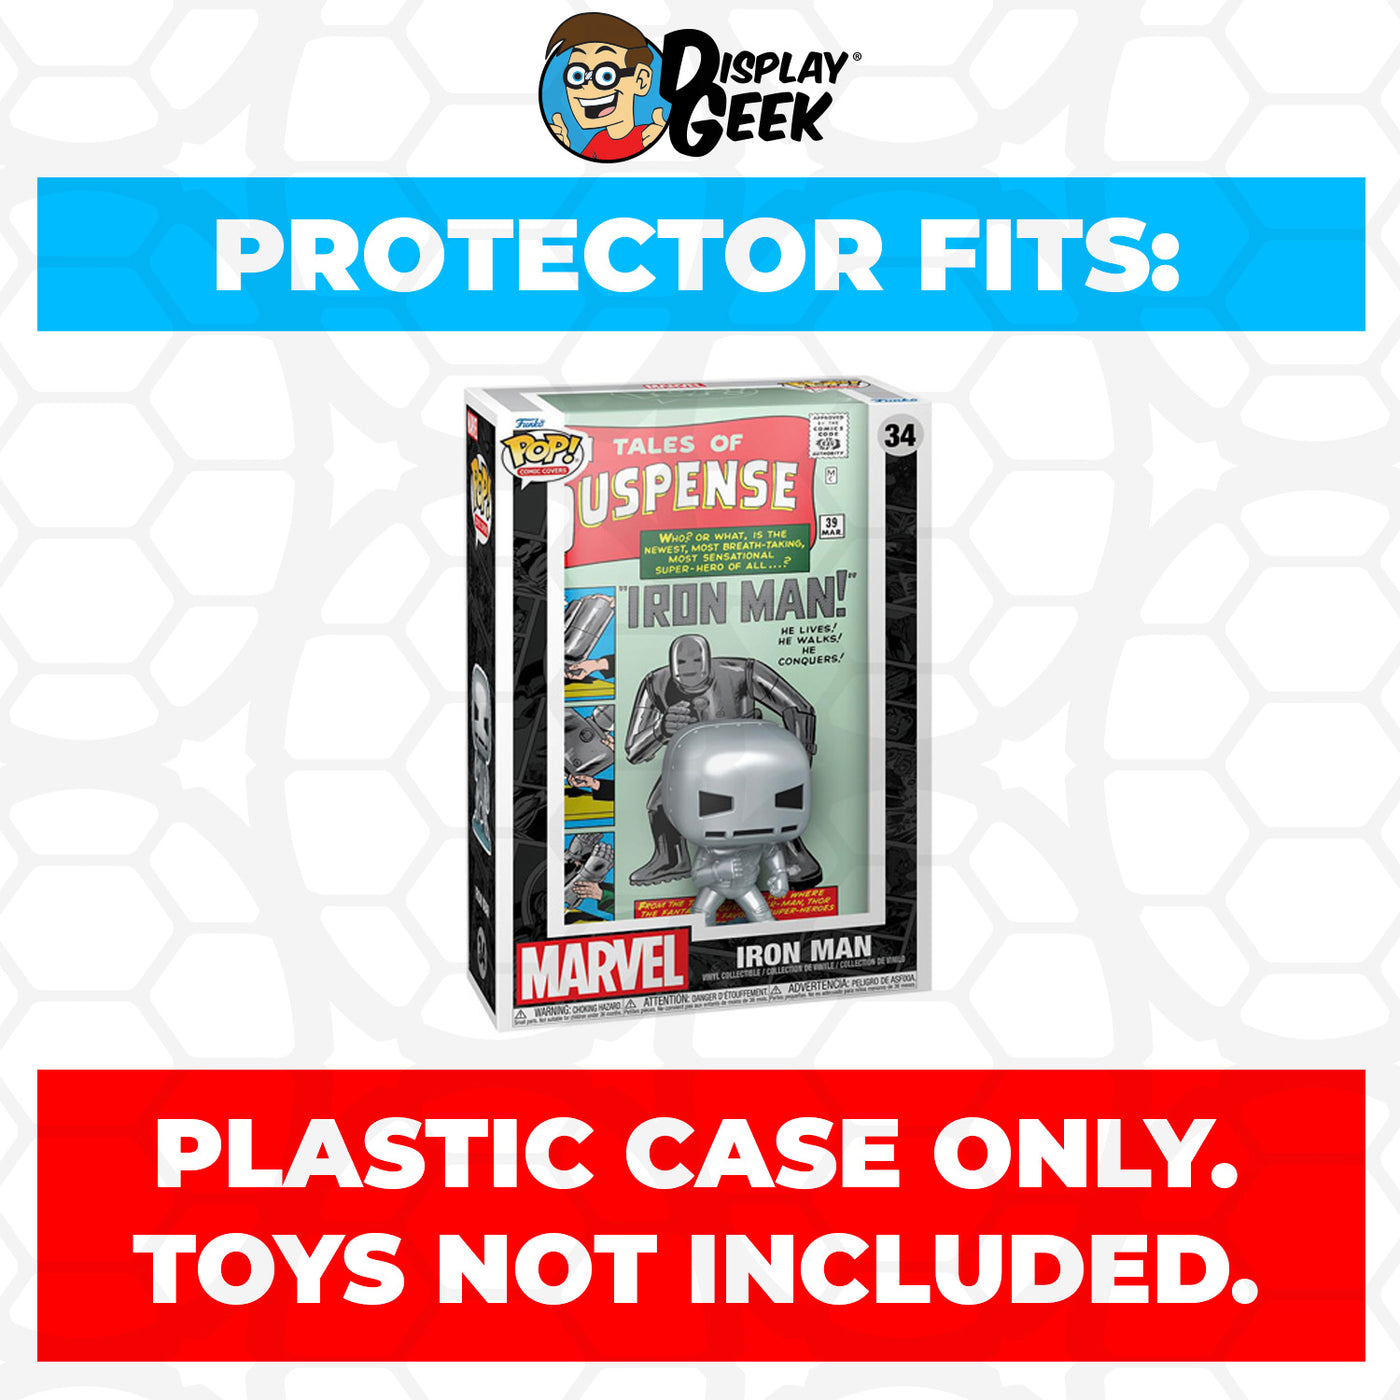 Pop Protector for Iron Man Tales of Suspense #39 Funko Pop Comic Covers on The Protector Guide App by Display Geek